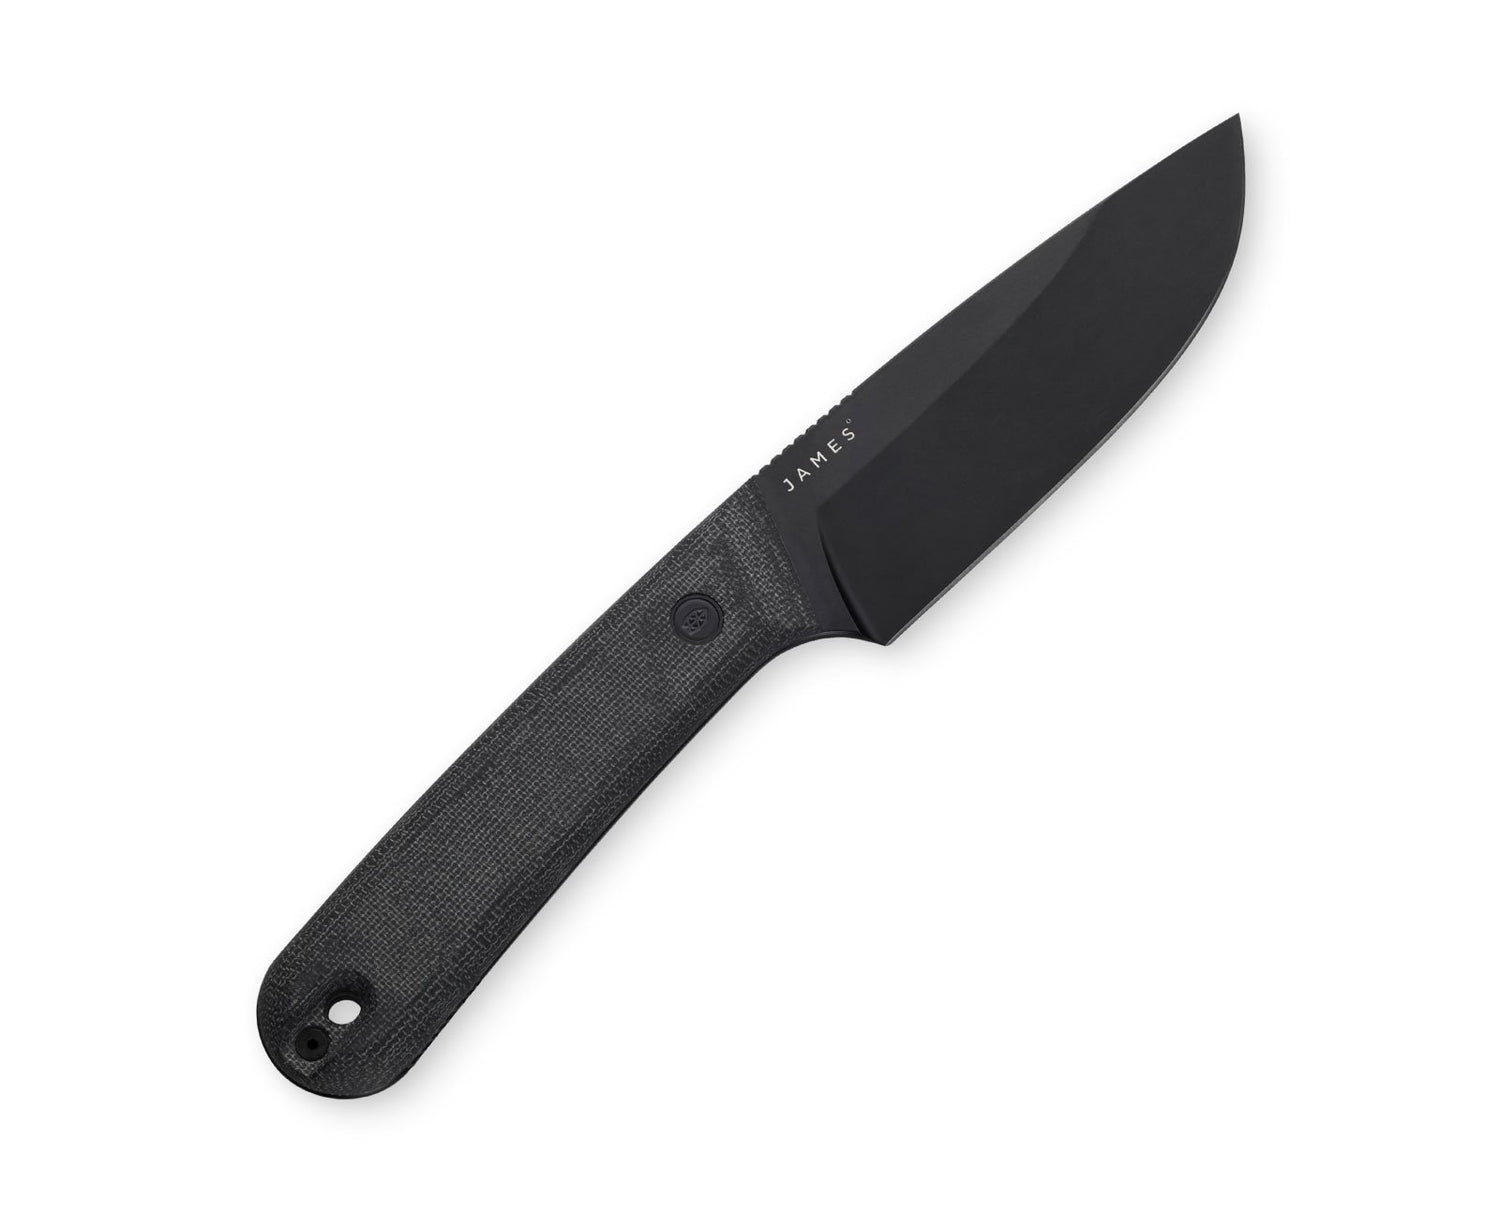 The Hell Gap knife with black handle and black blade.